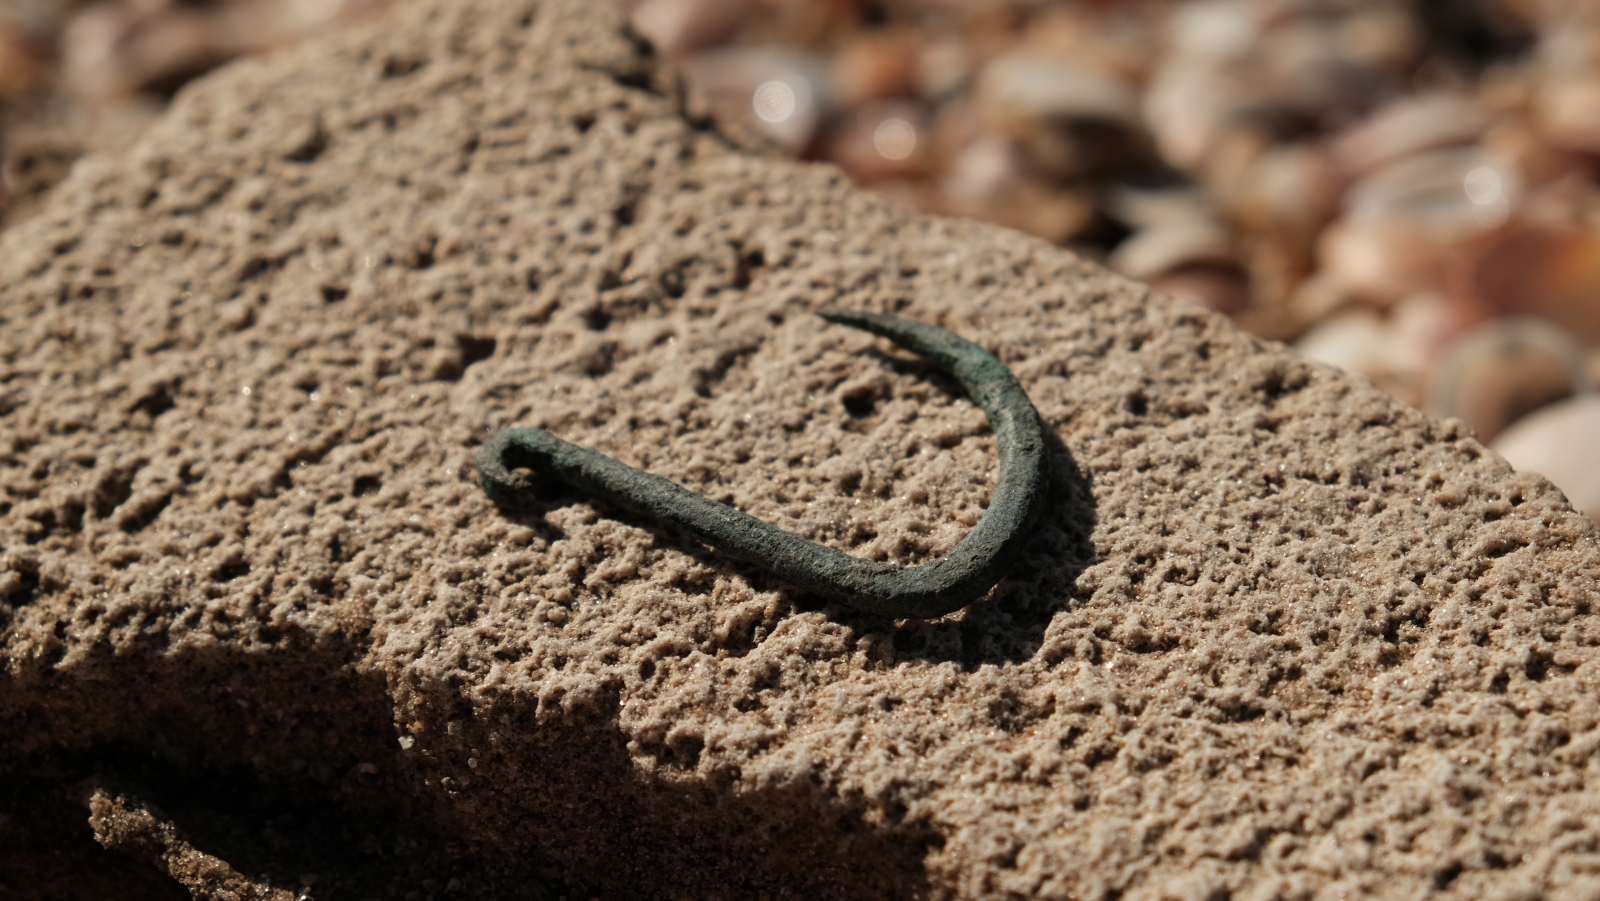 The 6,000-year-old copper fishing hook. Photo by Emil Aladjem/Israel Antiquities Authority